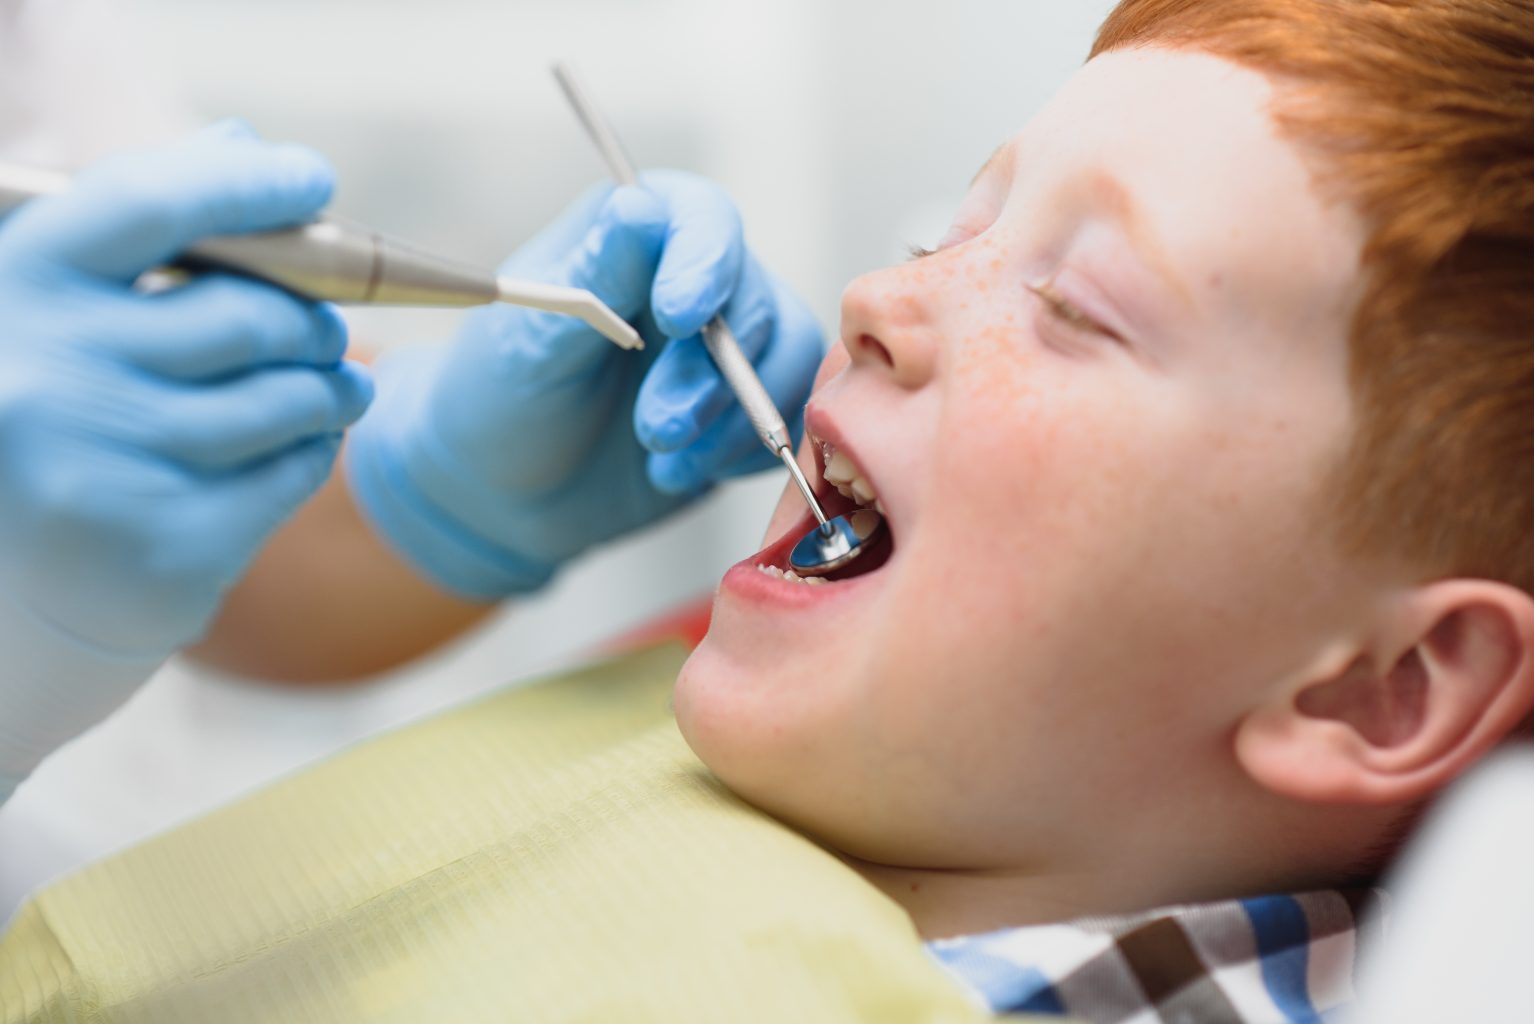 Boy Satisfied With The Service In The Dental Office. Concept Of Pediatric Dental Treatment